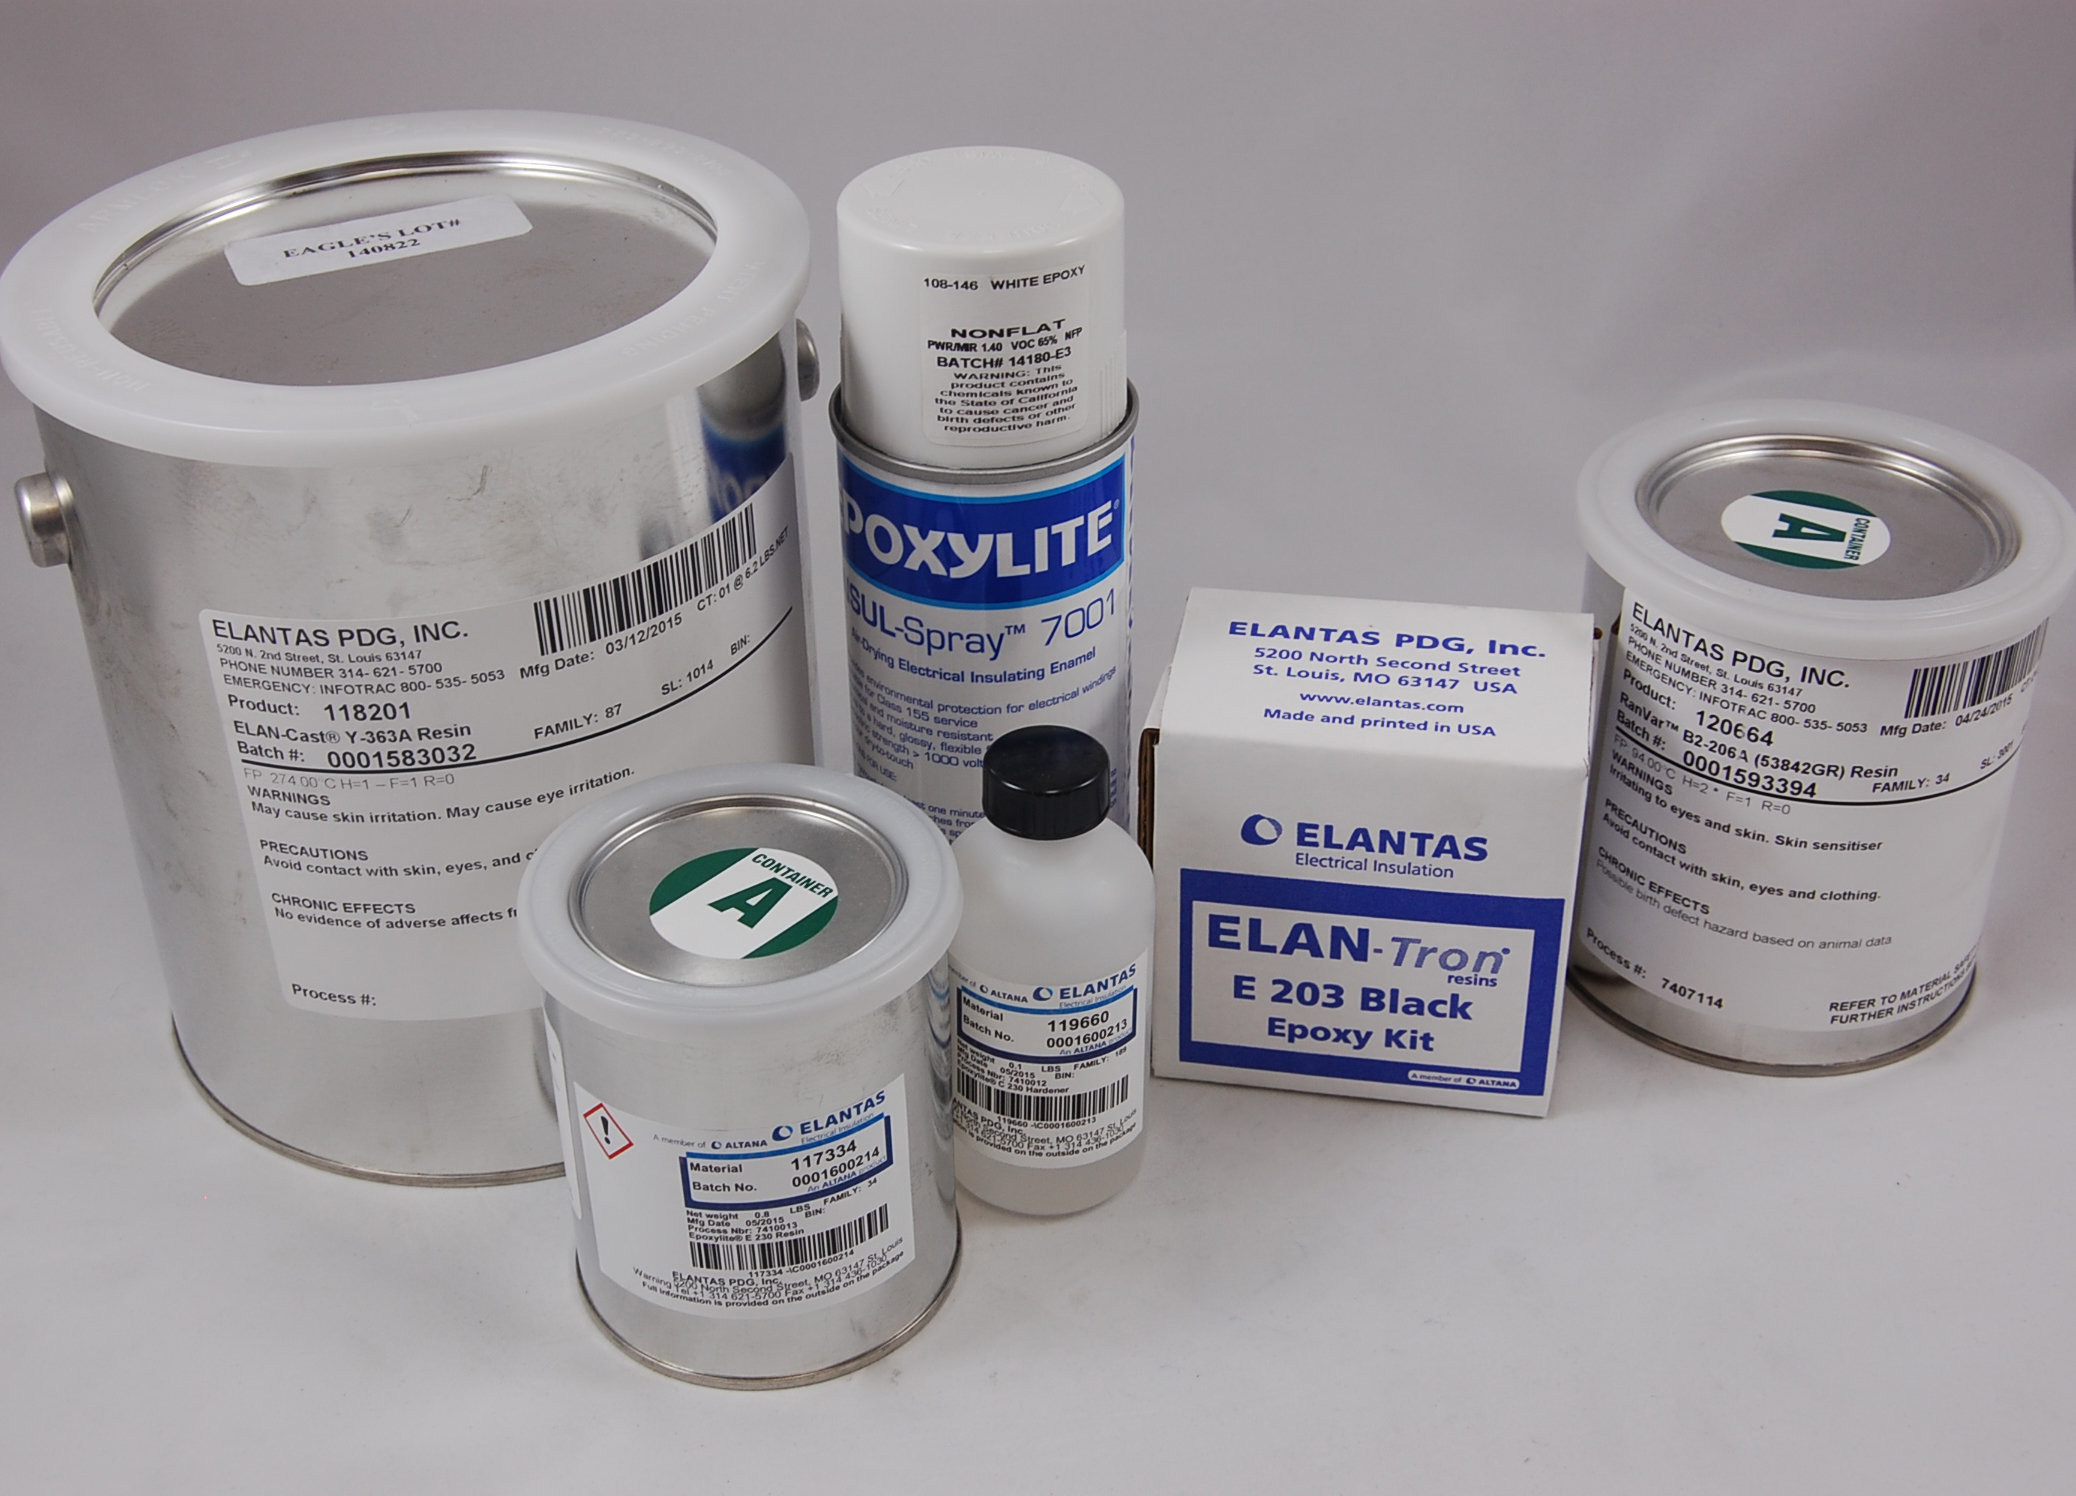 Epoxylite B2-206 Epoxy Resin/Hardener Two-Component Room Temperature Cure Epoxy Resin Kit, clear/amber, 1 PINT can